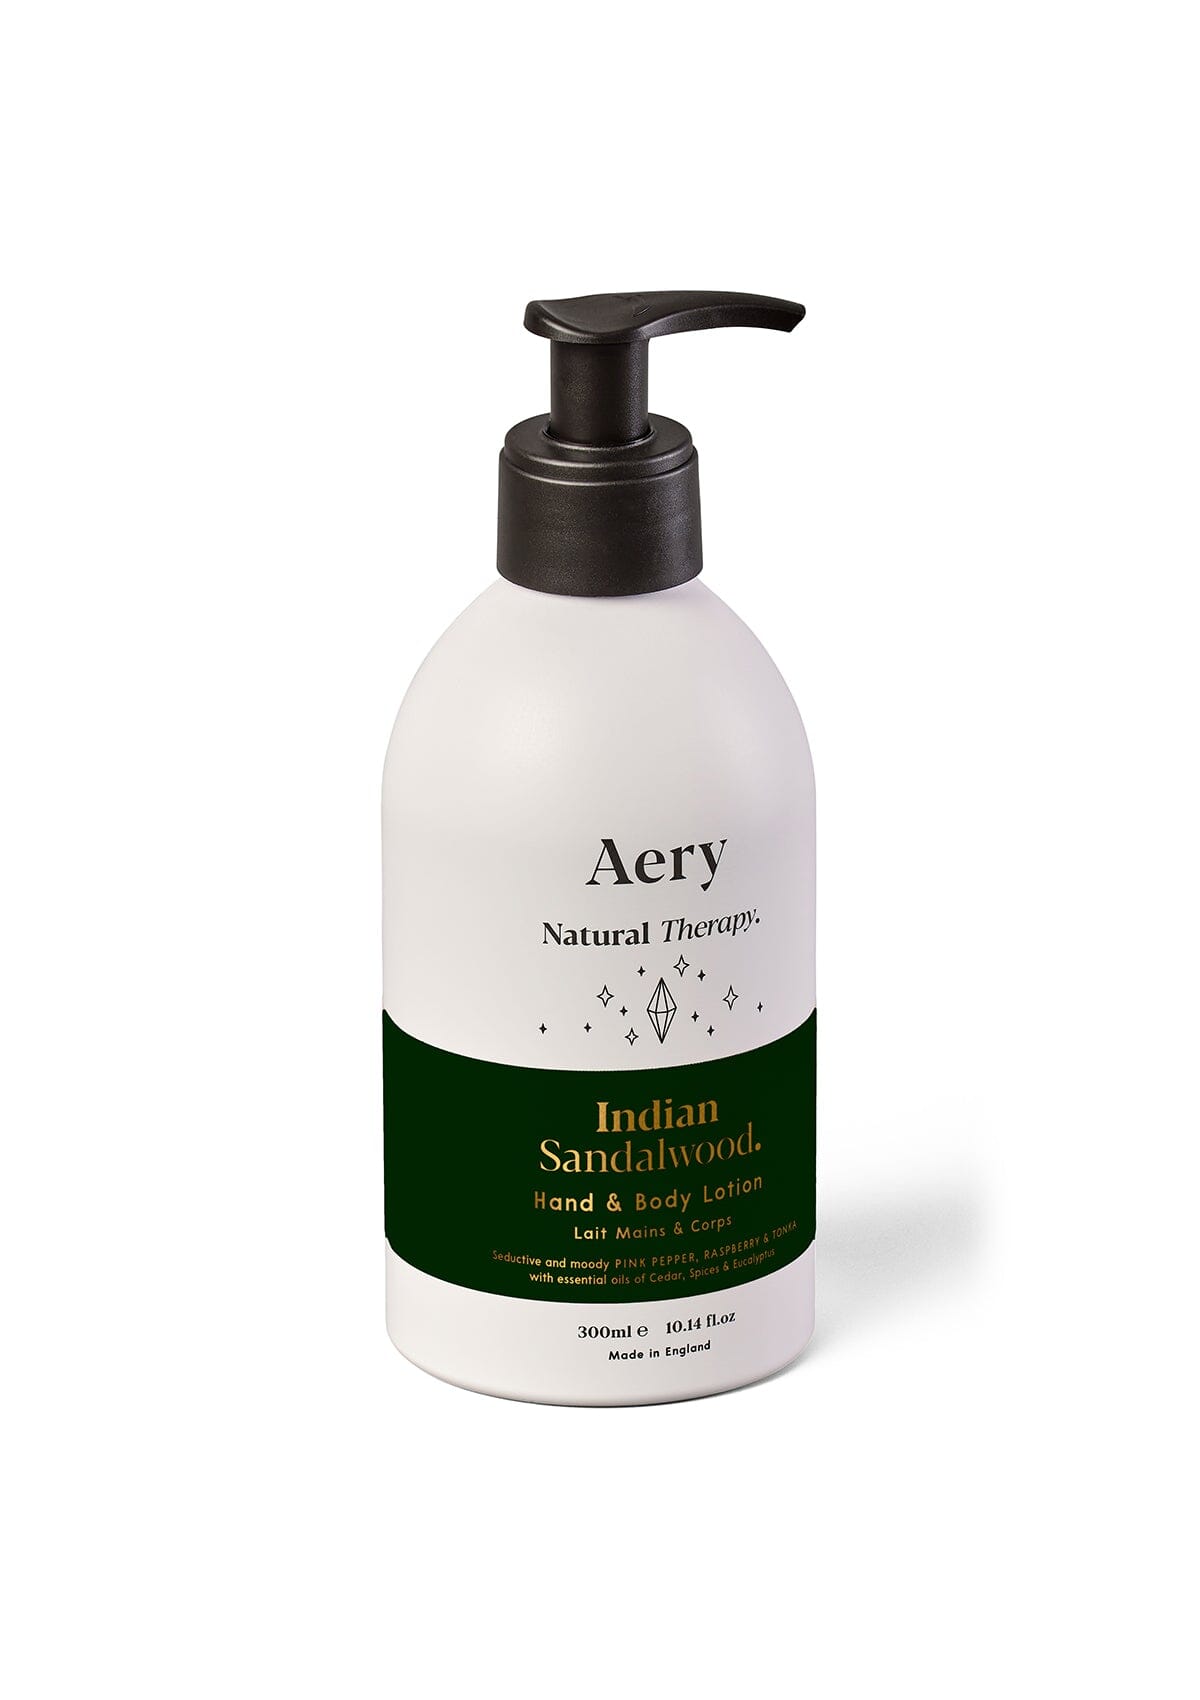 Black Indian Sandalwood Hand and Body Lotion by Aery displayed on white background